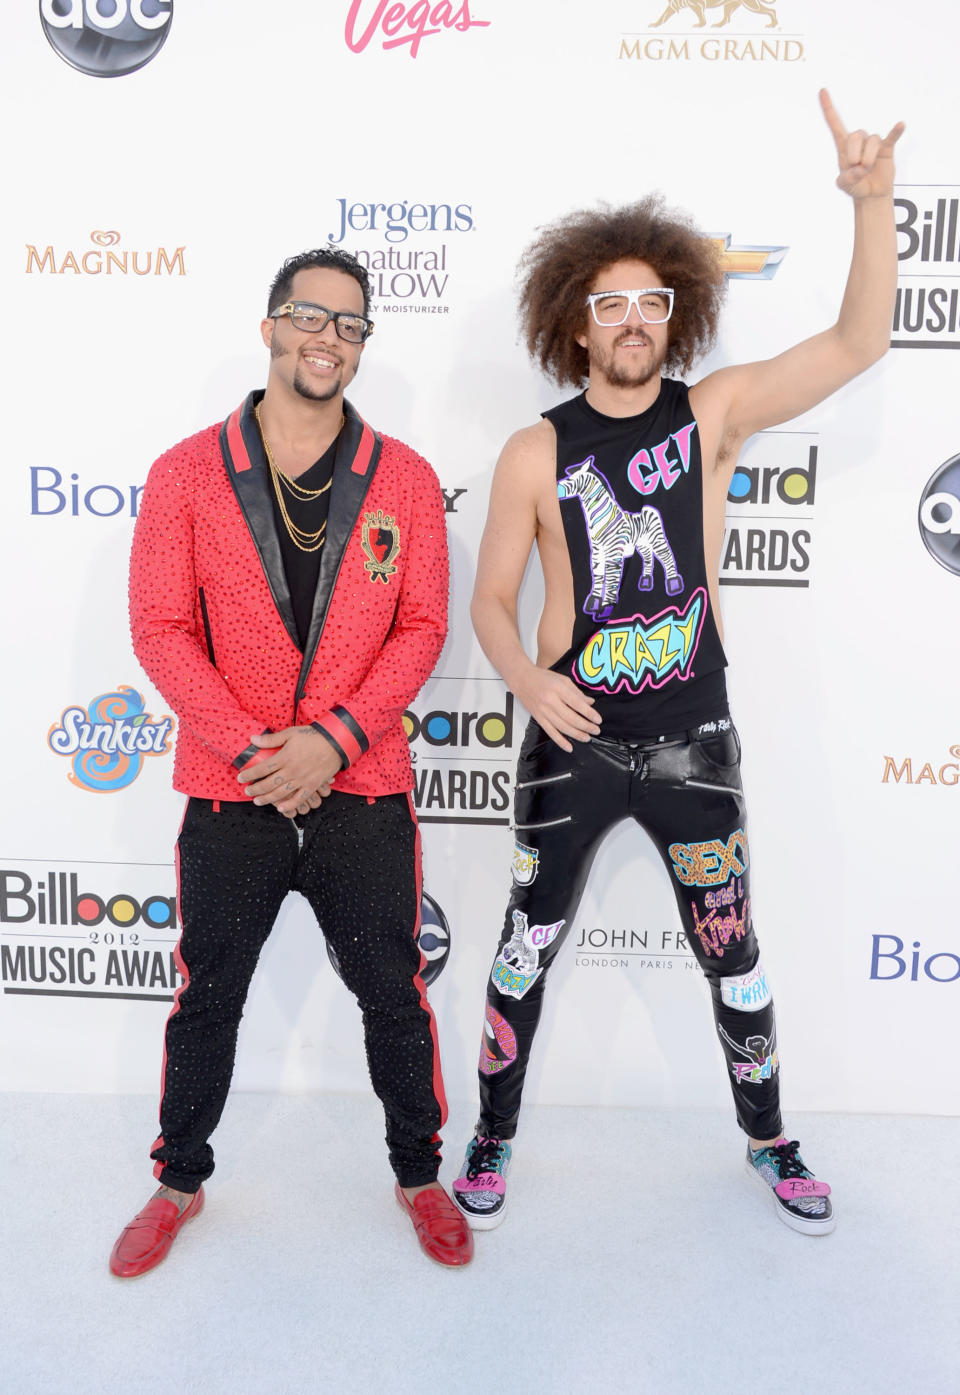 LAS VEGAS, NV - MAY 20: Musicians Sky Blu and Redfoo of 'LMFAO' arrives at the 2012 Billboard Music Awards held at the MGM Grand Garden Arena on May 20, 2012 in Las Vegas, Nevada. (Photo by Frazer Harrison/Getty Images for ABC)